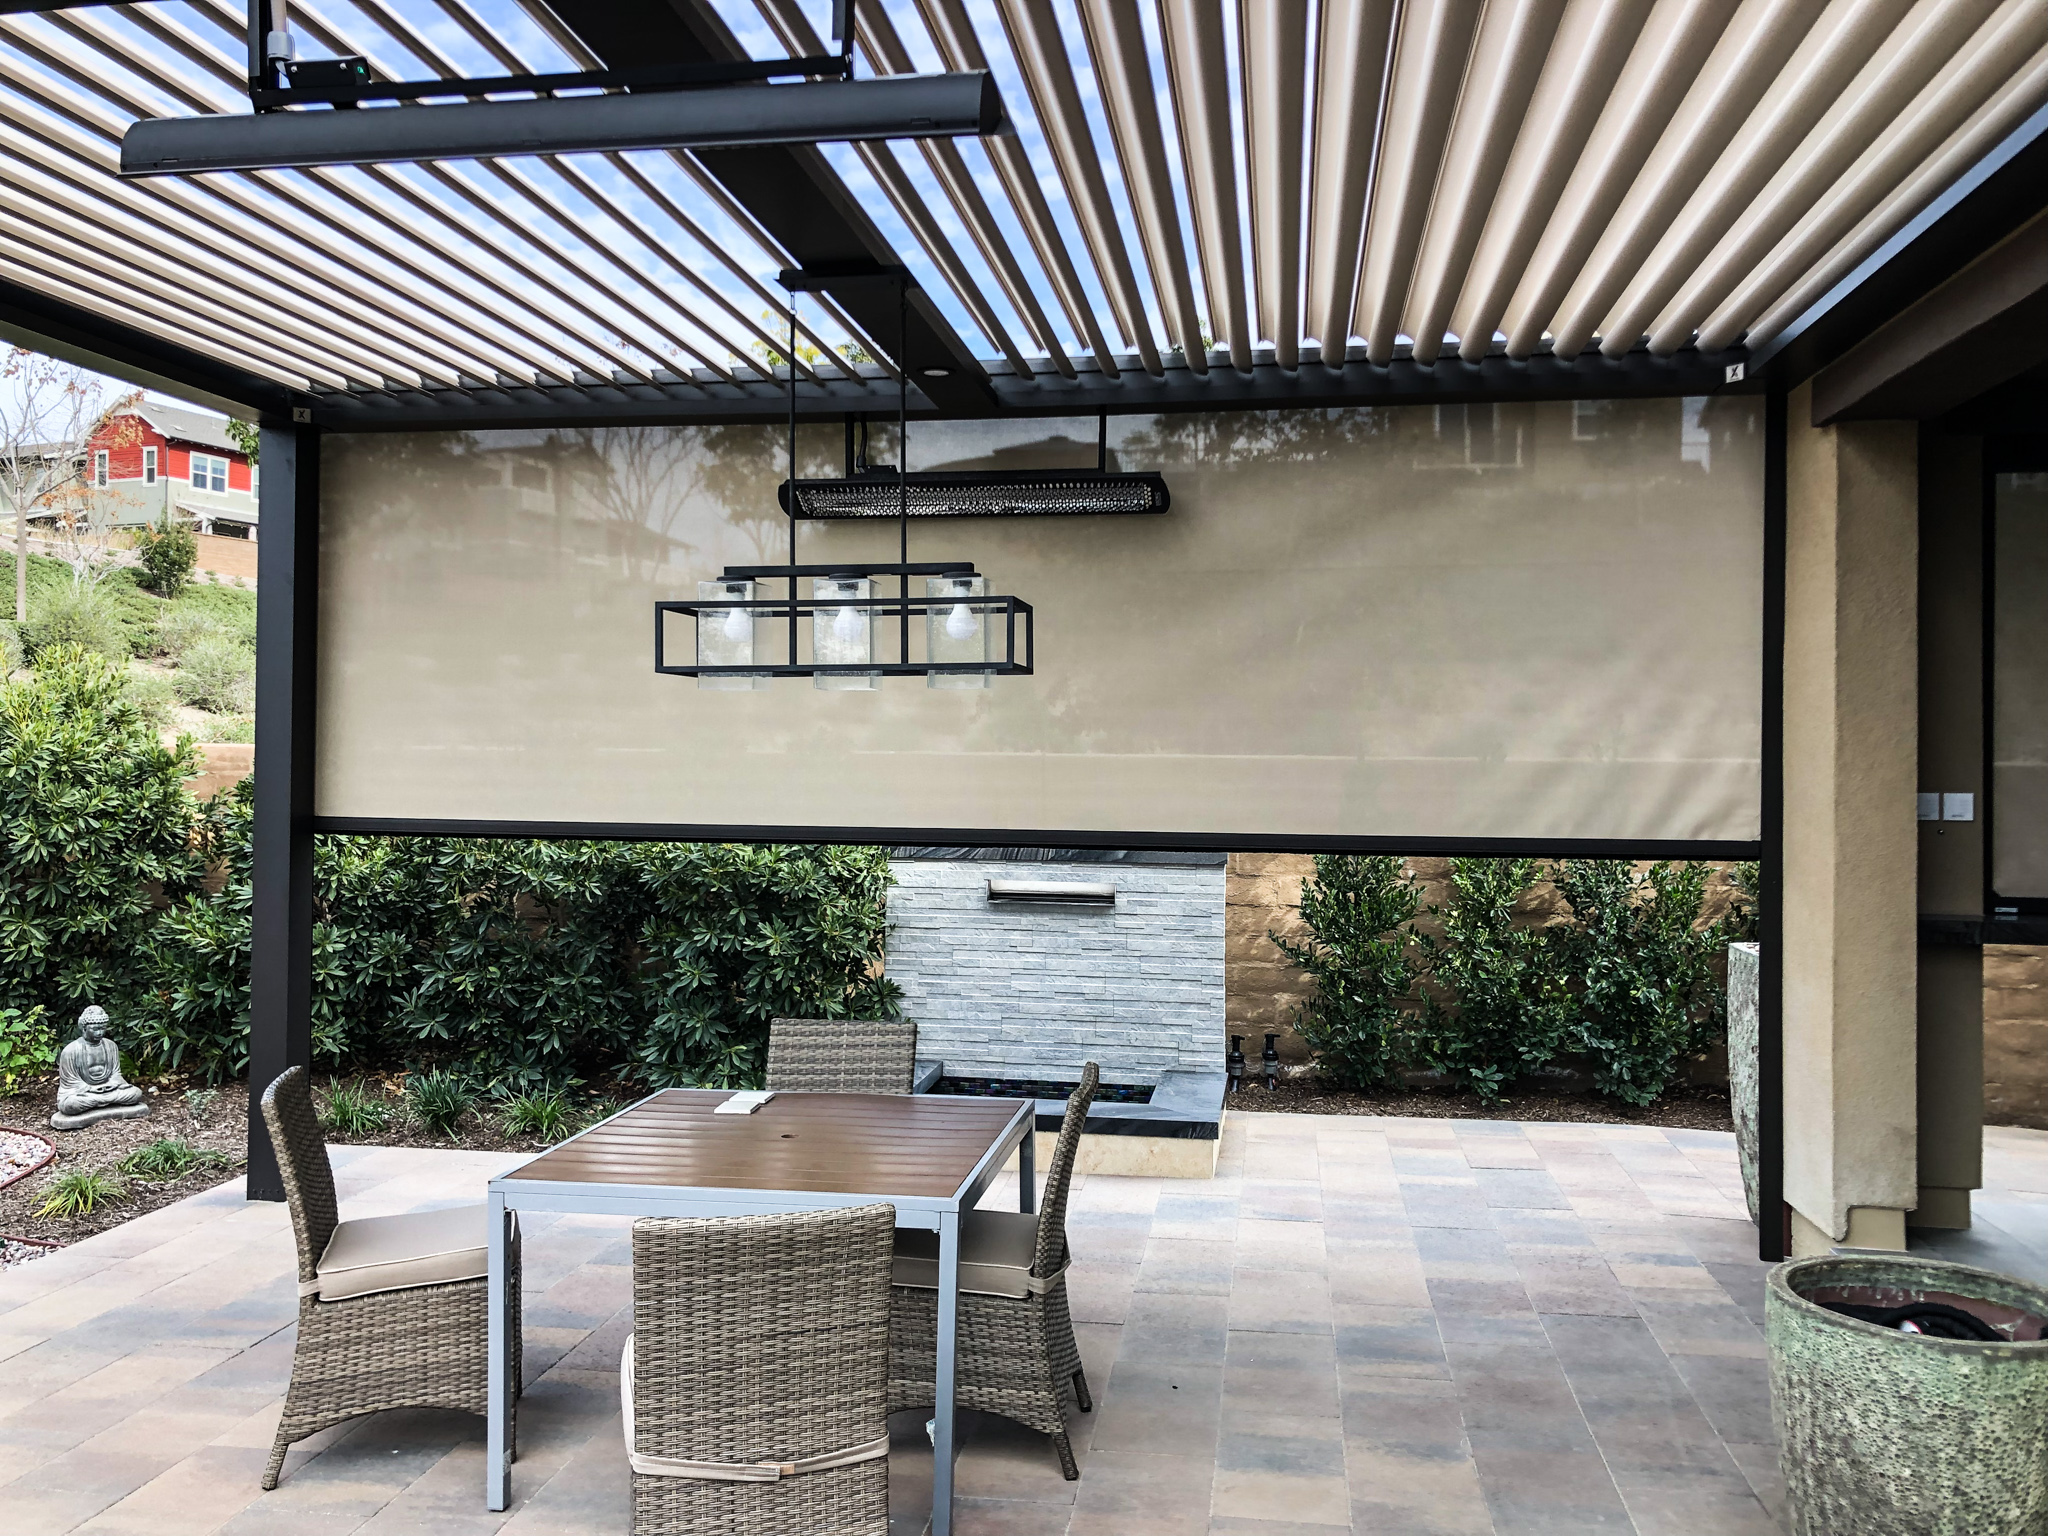 Get your patio ready with Motorized Power Screens!